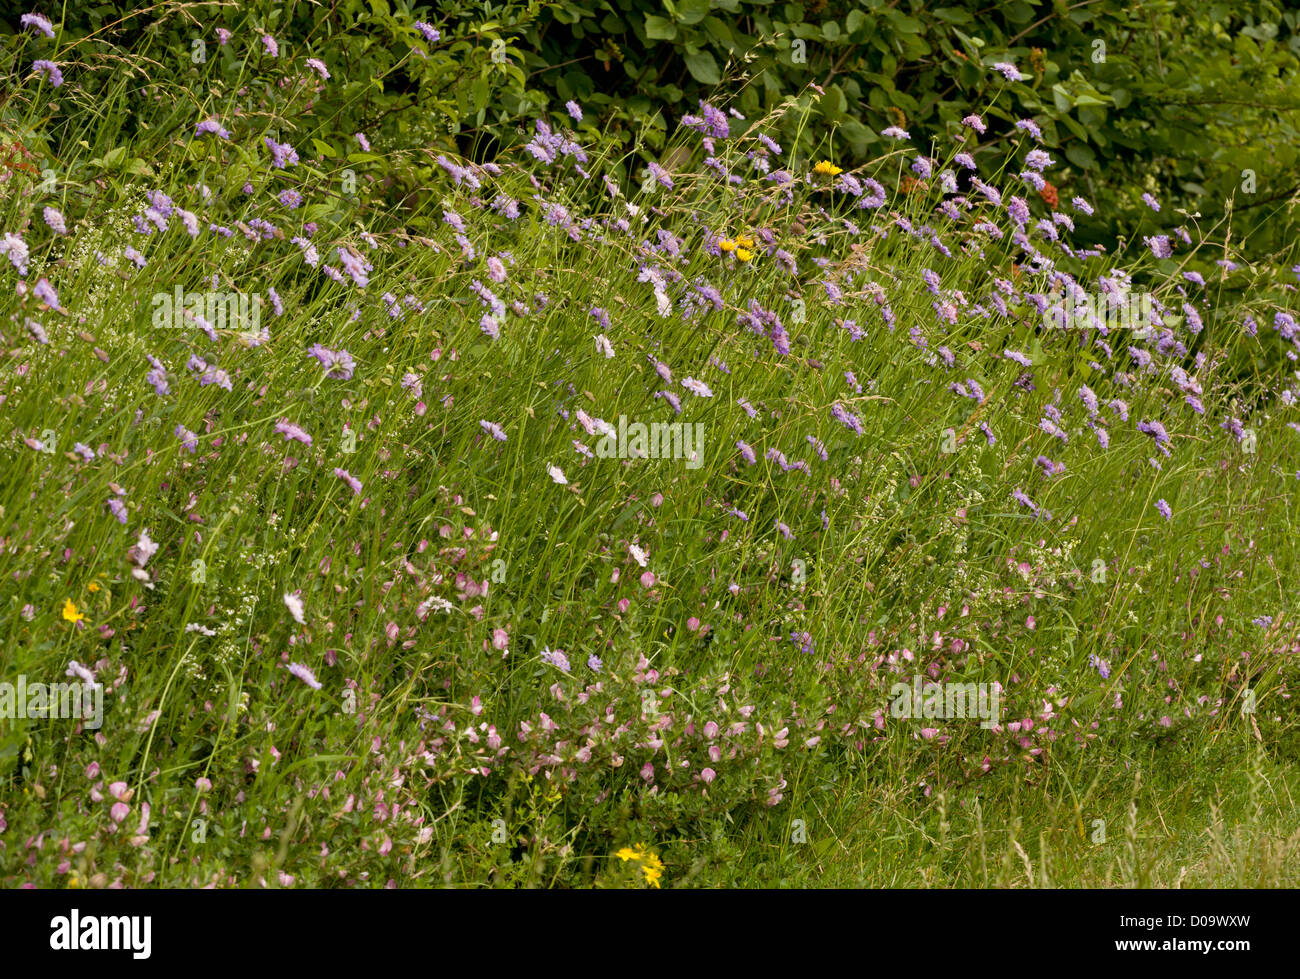 Species-rich wood border with Field Scabious and Common Restharrow, Ranscombe Farm nature reserve, Kent, England, UK Stock Photo